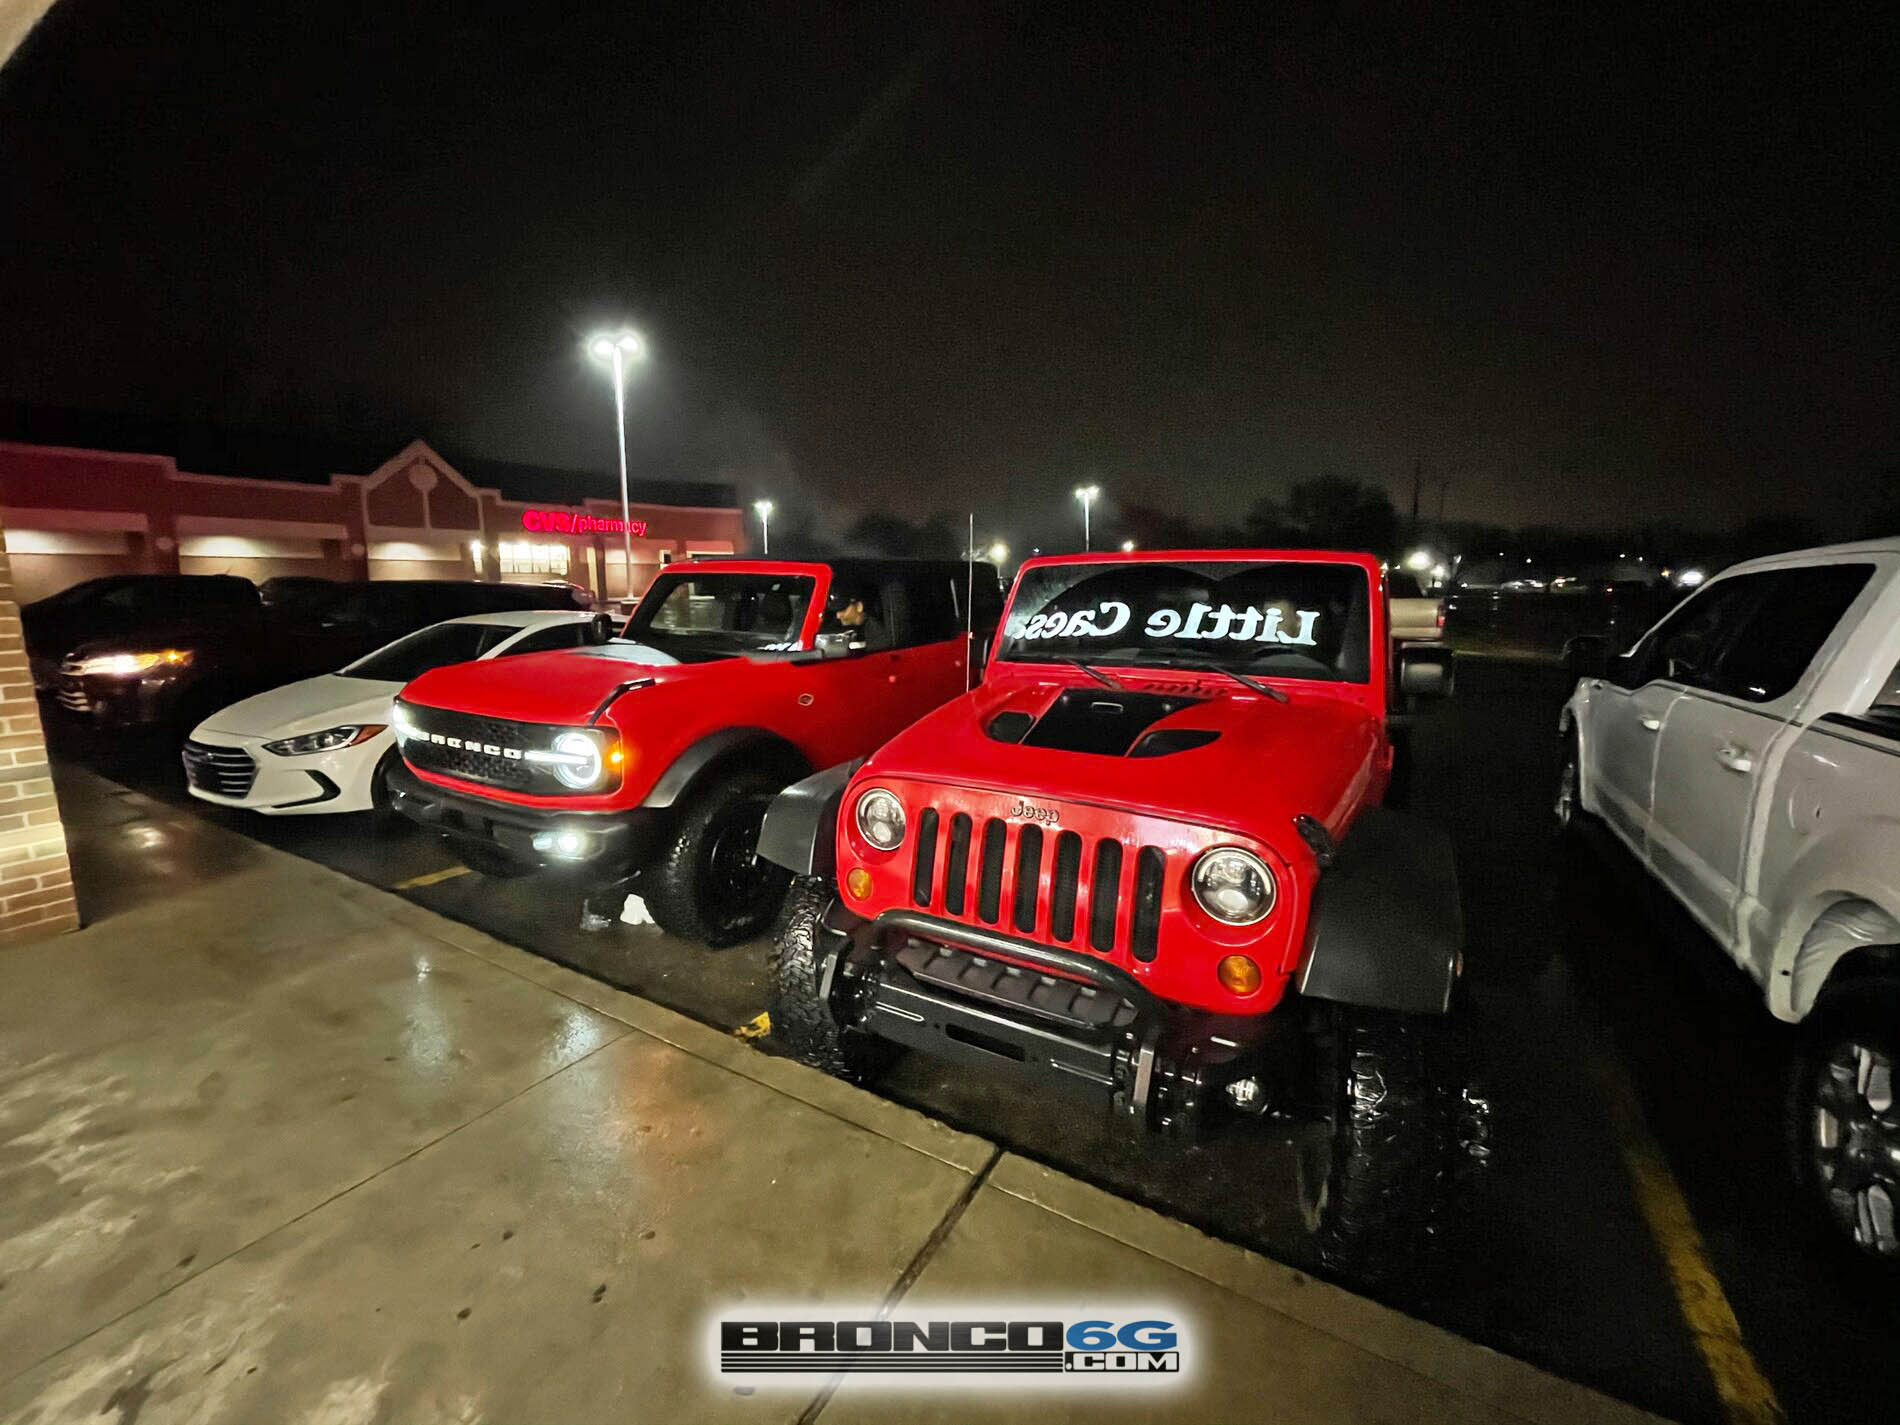 2021 Bronco Wildtrak Sasquatch side by side comparison with lifted Jeep 15.jpg